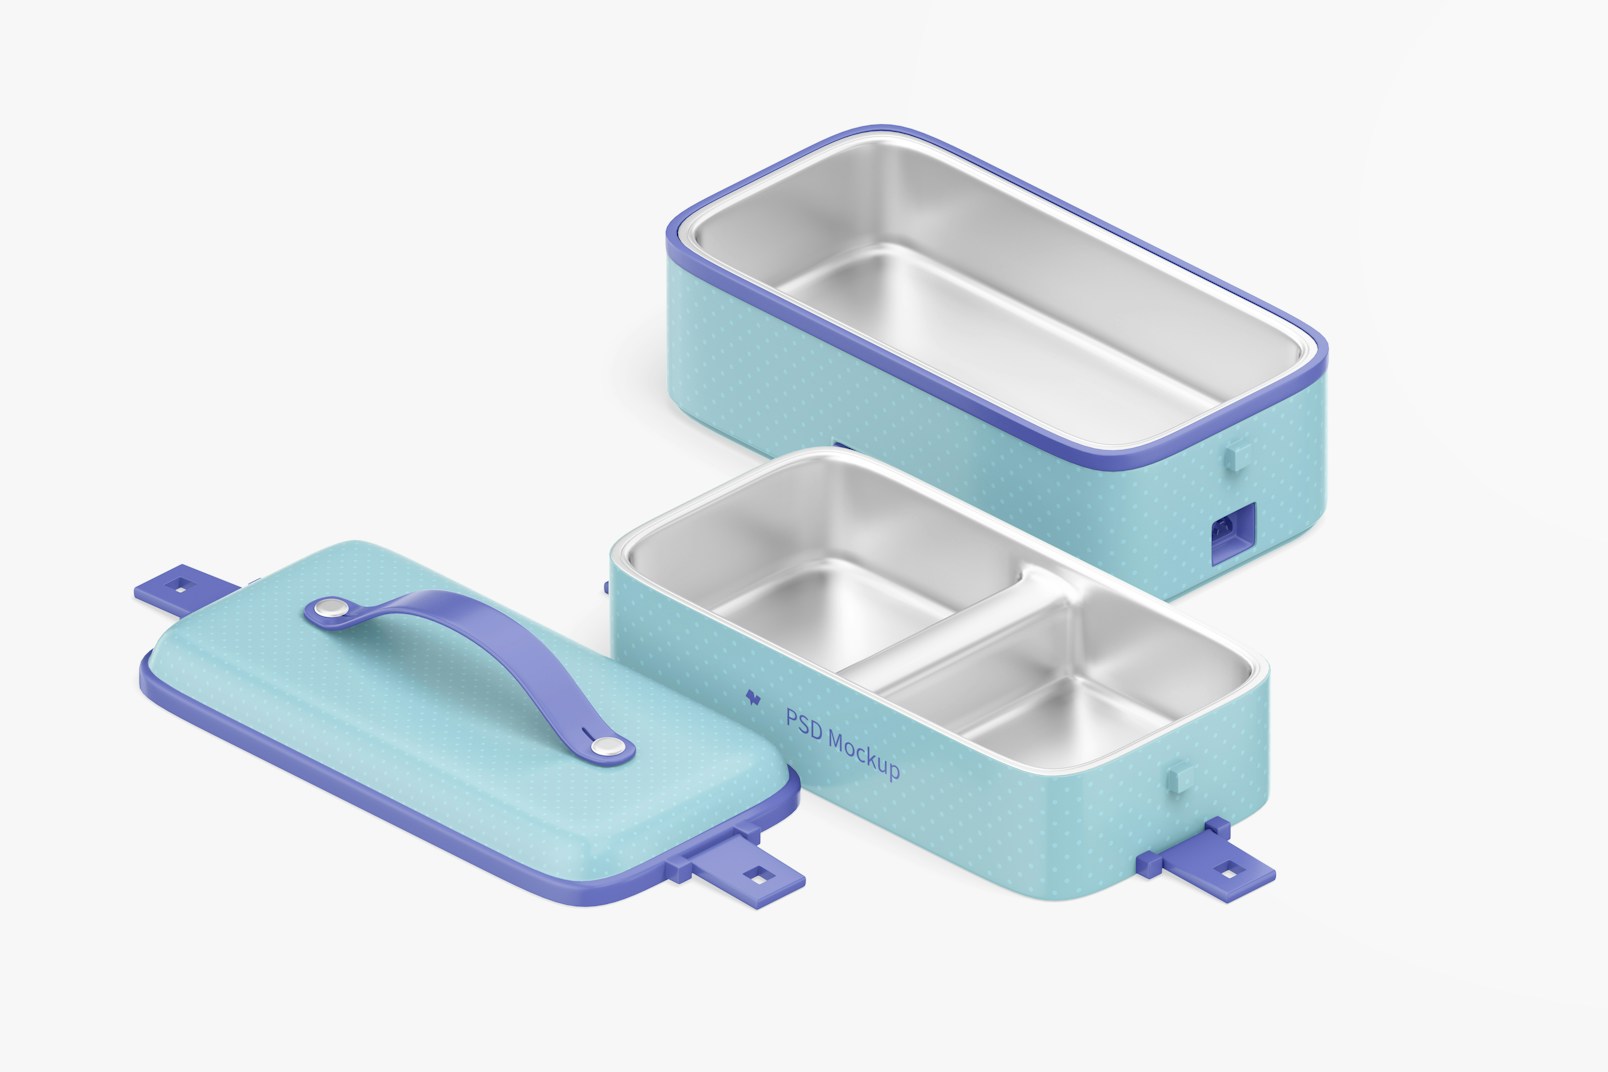 Portable Electric Lunch Box Mockup, Isometric Right View